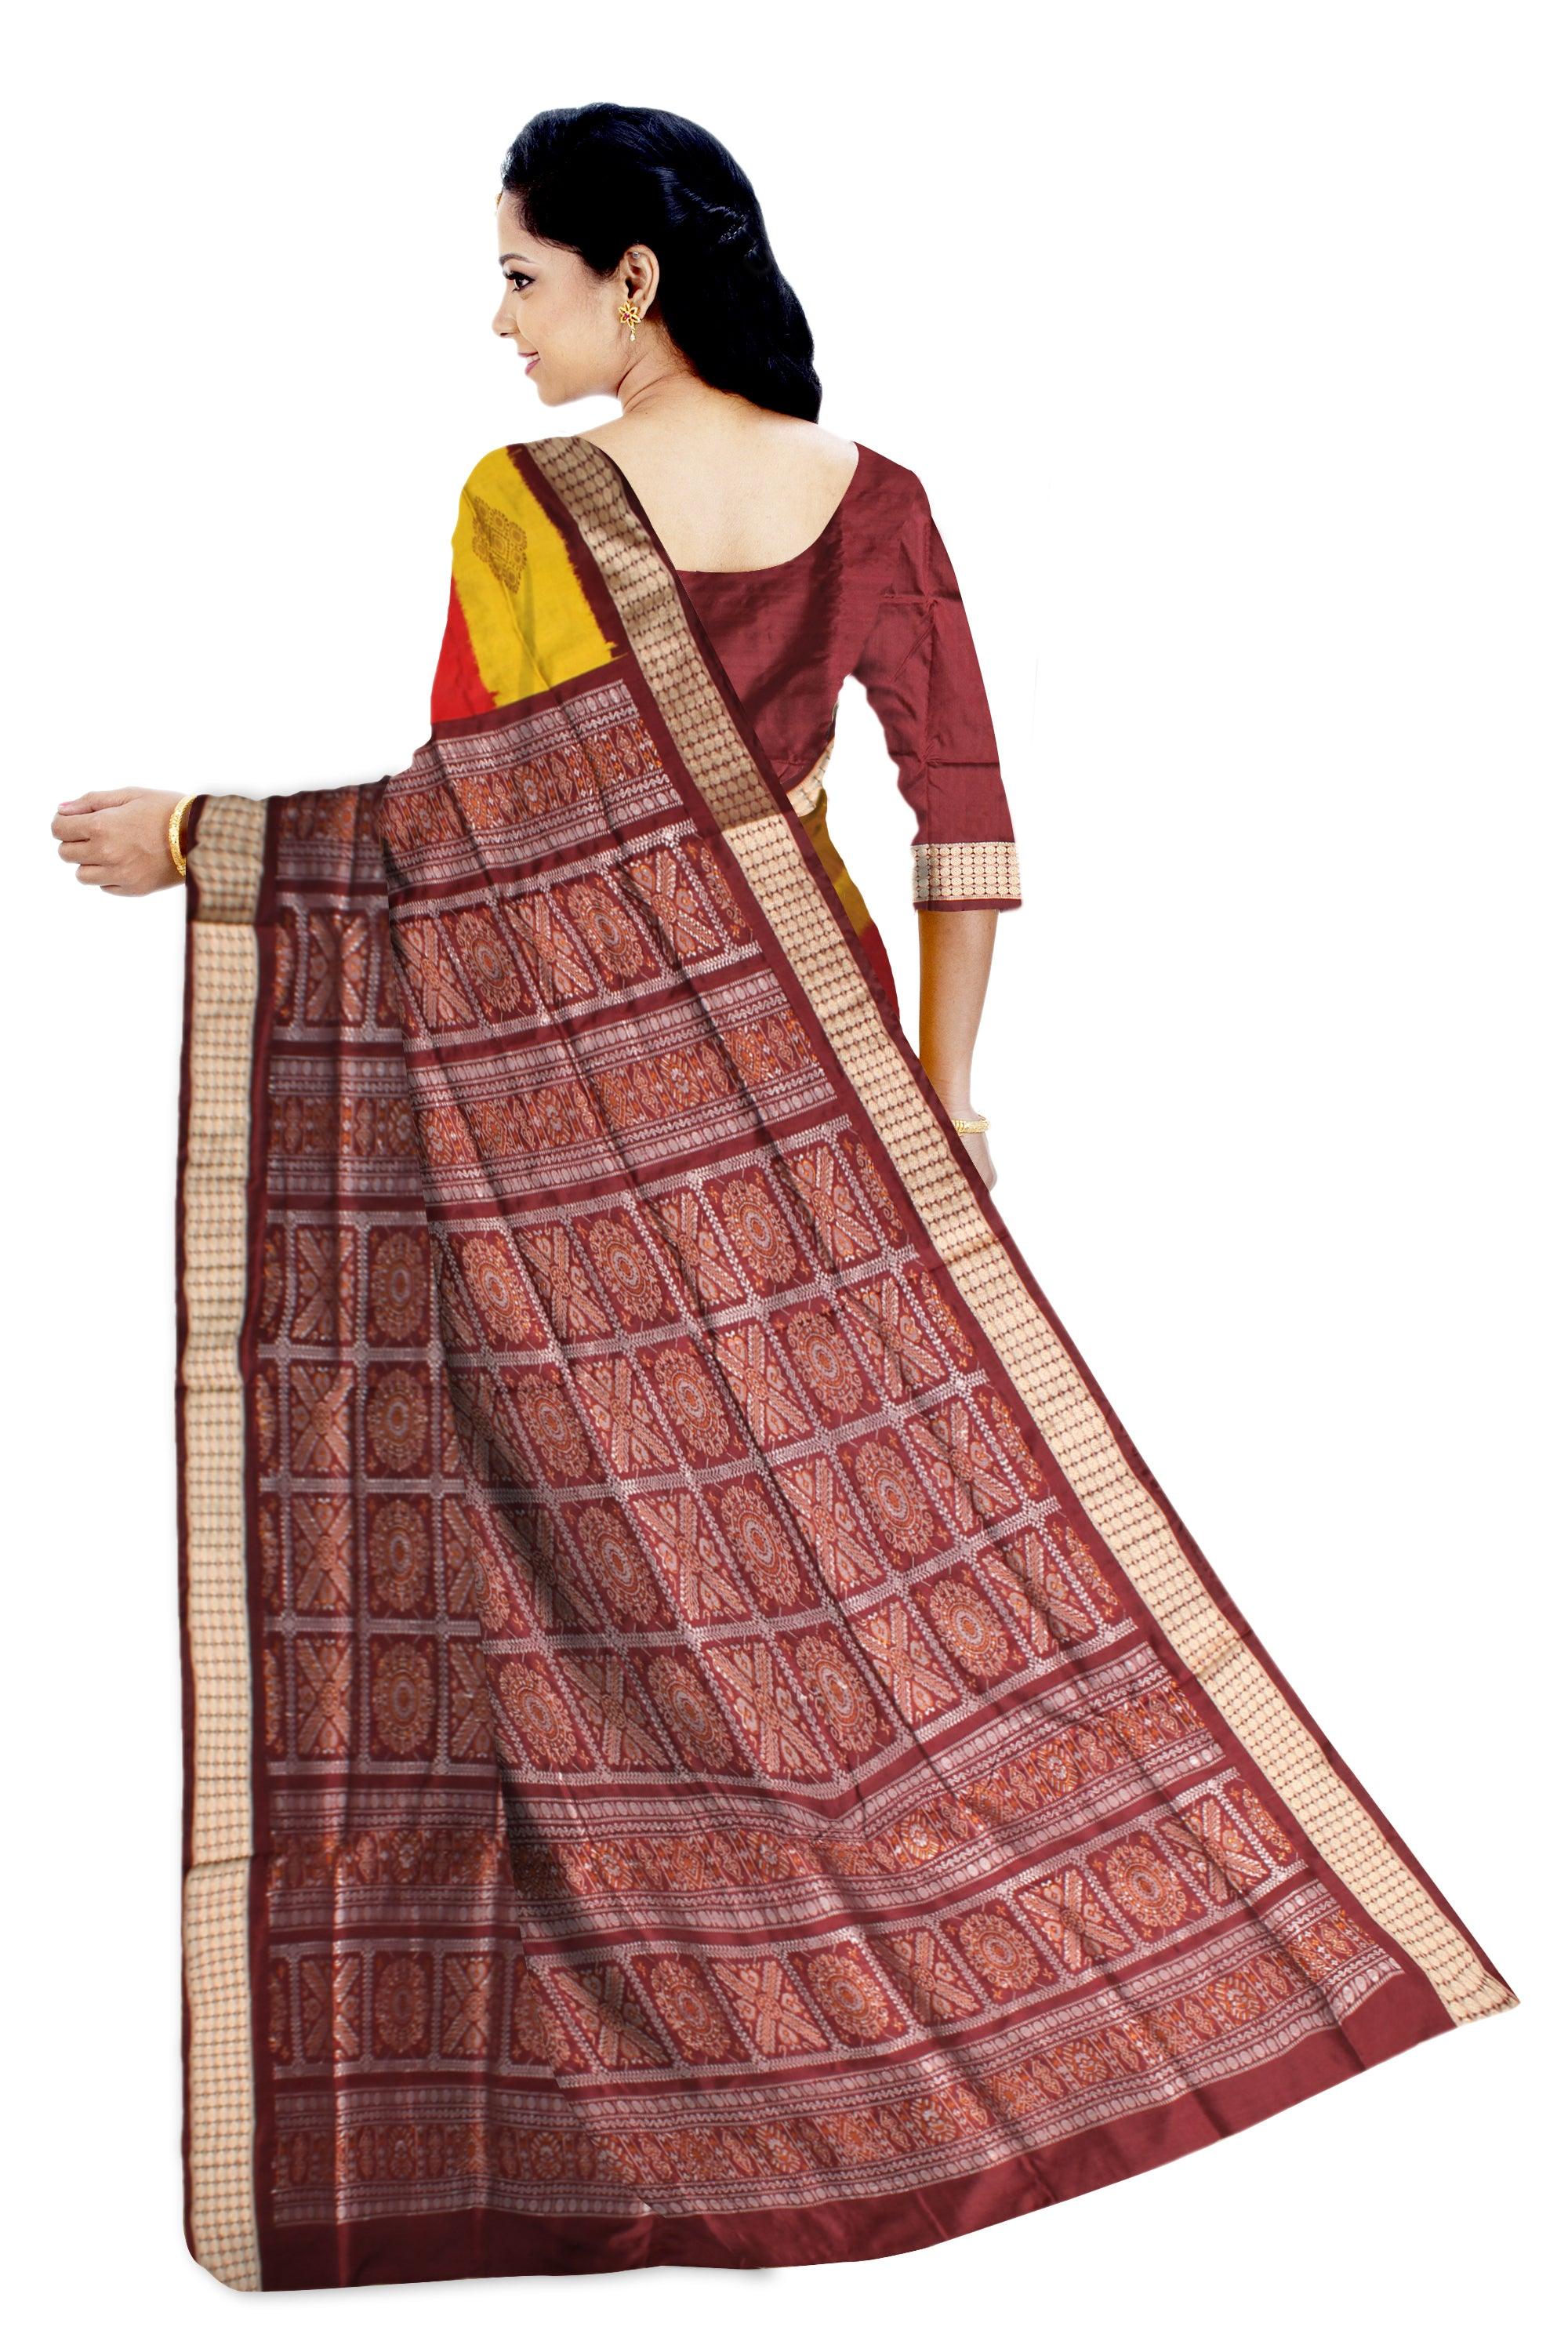 Sambalpuri Pata Saree in Maroon and Yellow  Color in box design with Silver color Border with blouse piece. - Koshali Arts & Crafts Enterprise